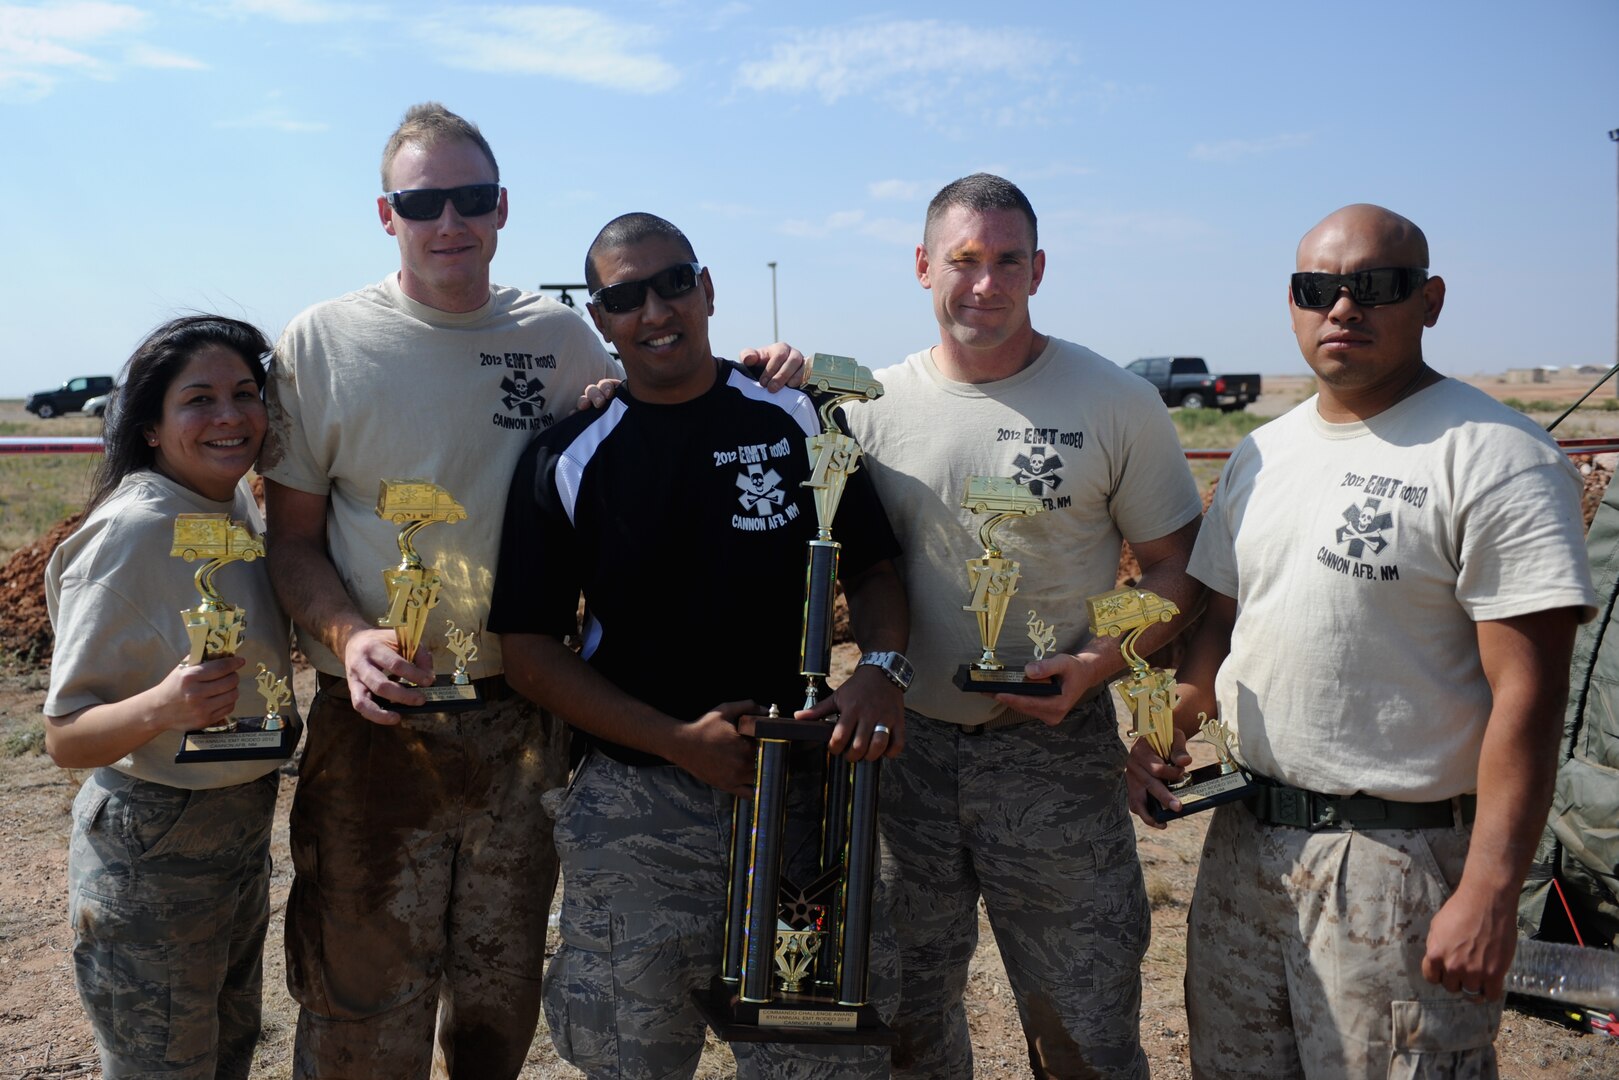 First place winners of the 2012 Emergency Medical Technician Rodeo was a team from the Medical Education and Training Campus at Fort Sam Houston in San Antonio, Texas: (left to right) Tech. Sgt. Gonzalez, Hospital Corpsman Second Class Leemauk, Staff Sgt. Rangel, Staff Sgt. Wolfe, Hospital Corpsman First Class Rodriguez. (U.S. Air Force photo/Airman 1st Class Xavier Lockley)